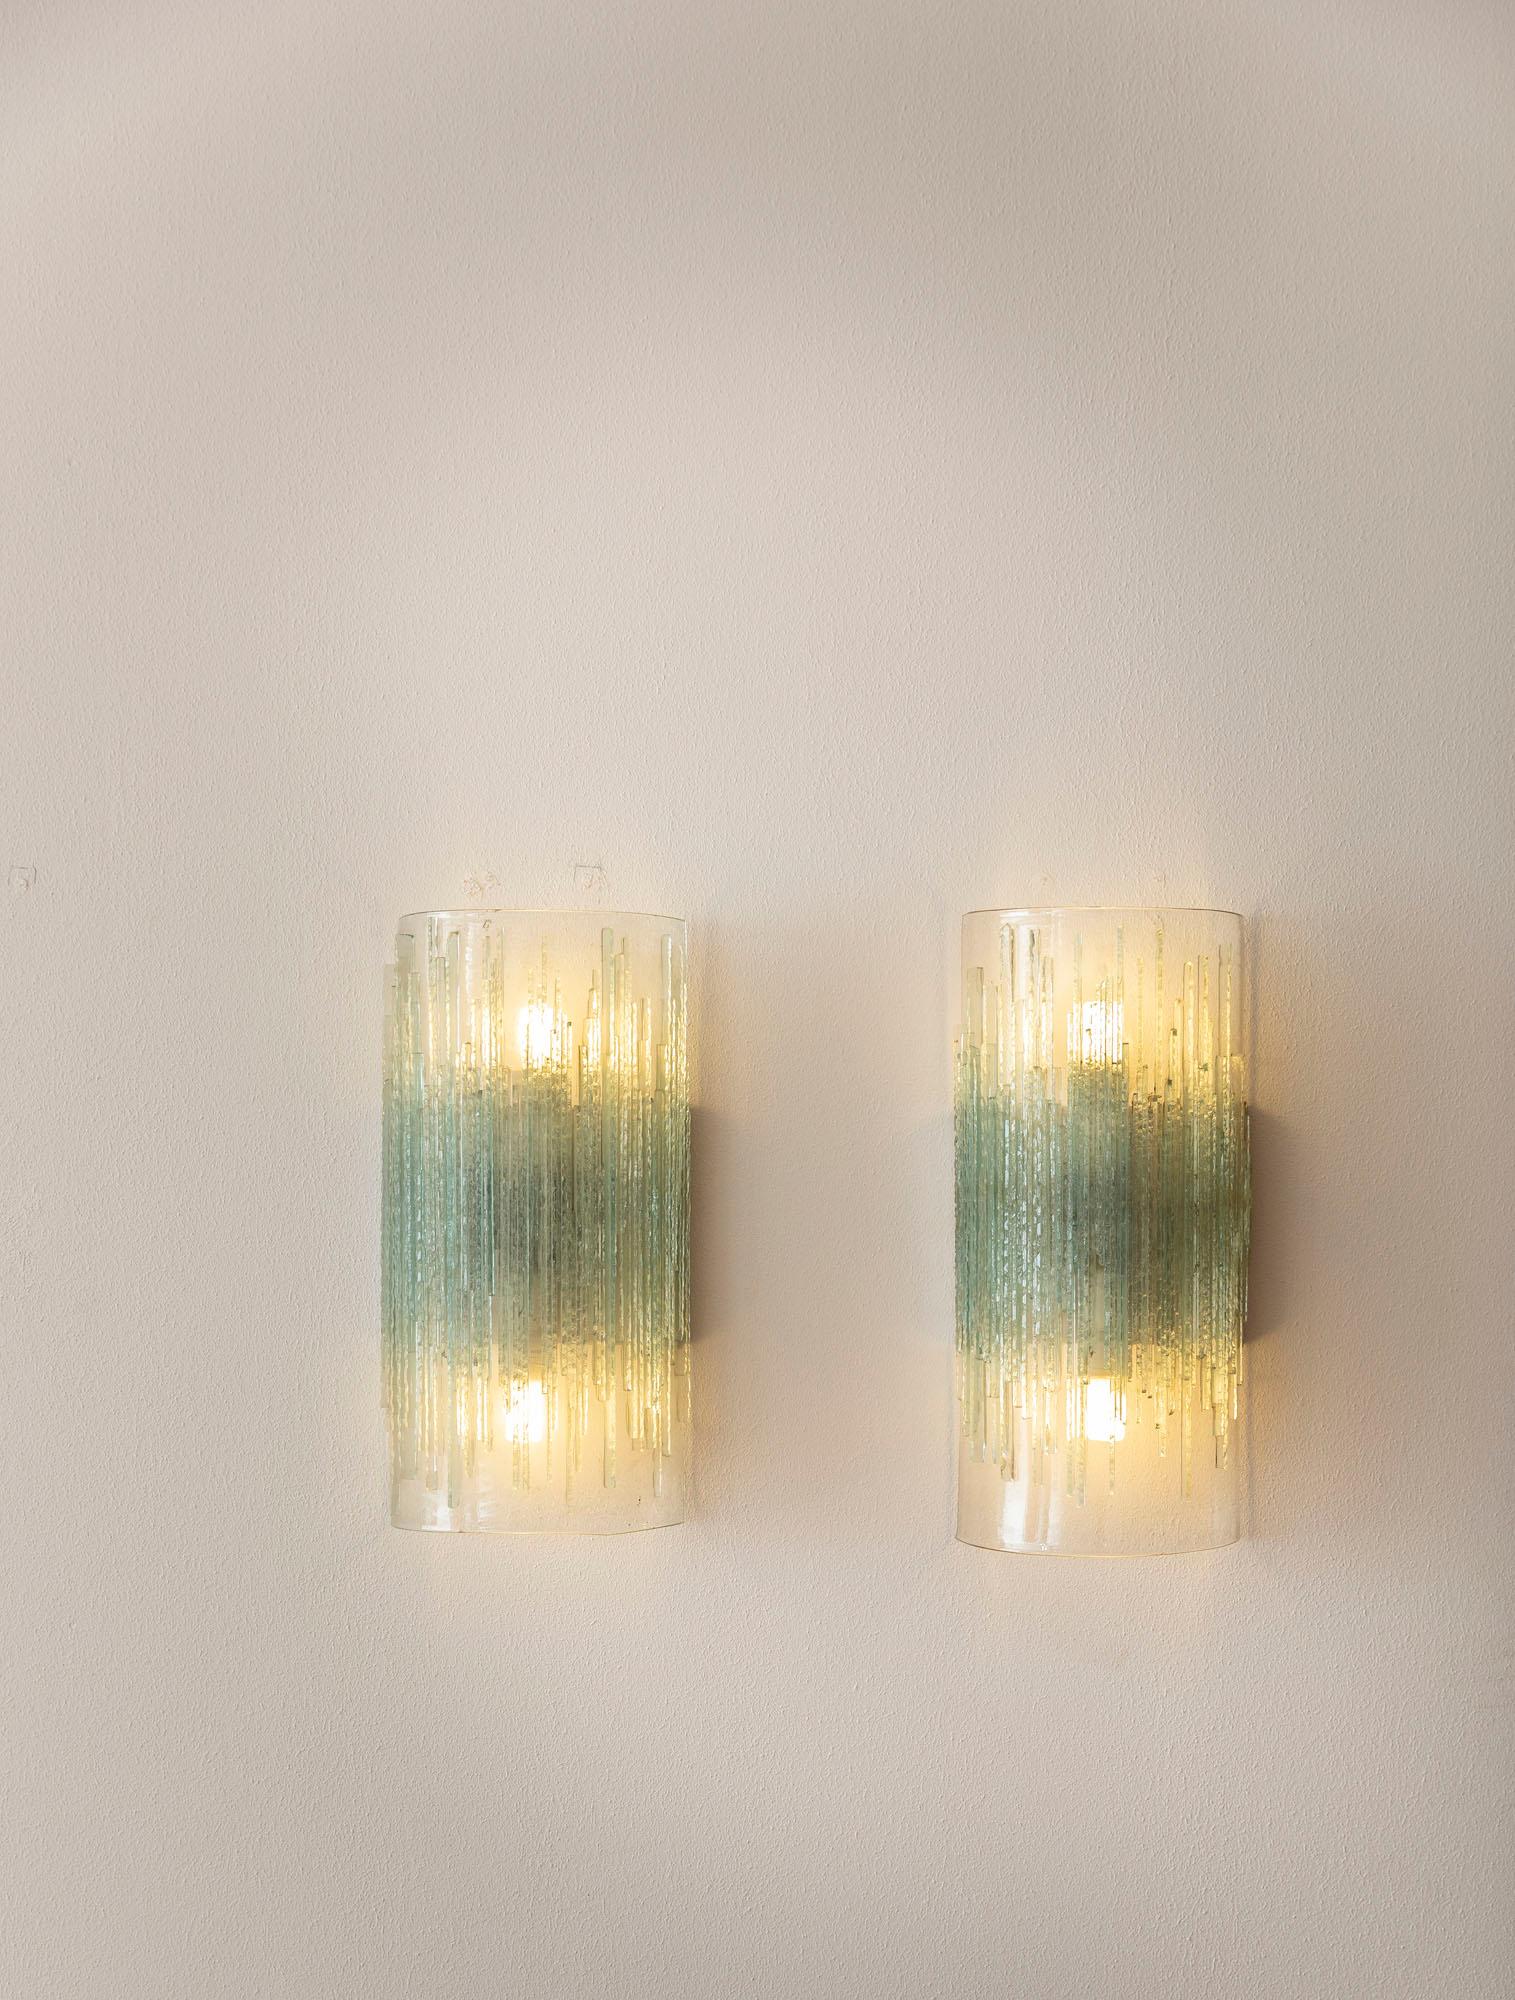 Italian Pair of glass wall lights attributed to Poliarte